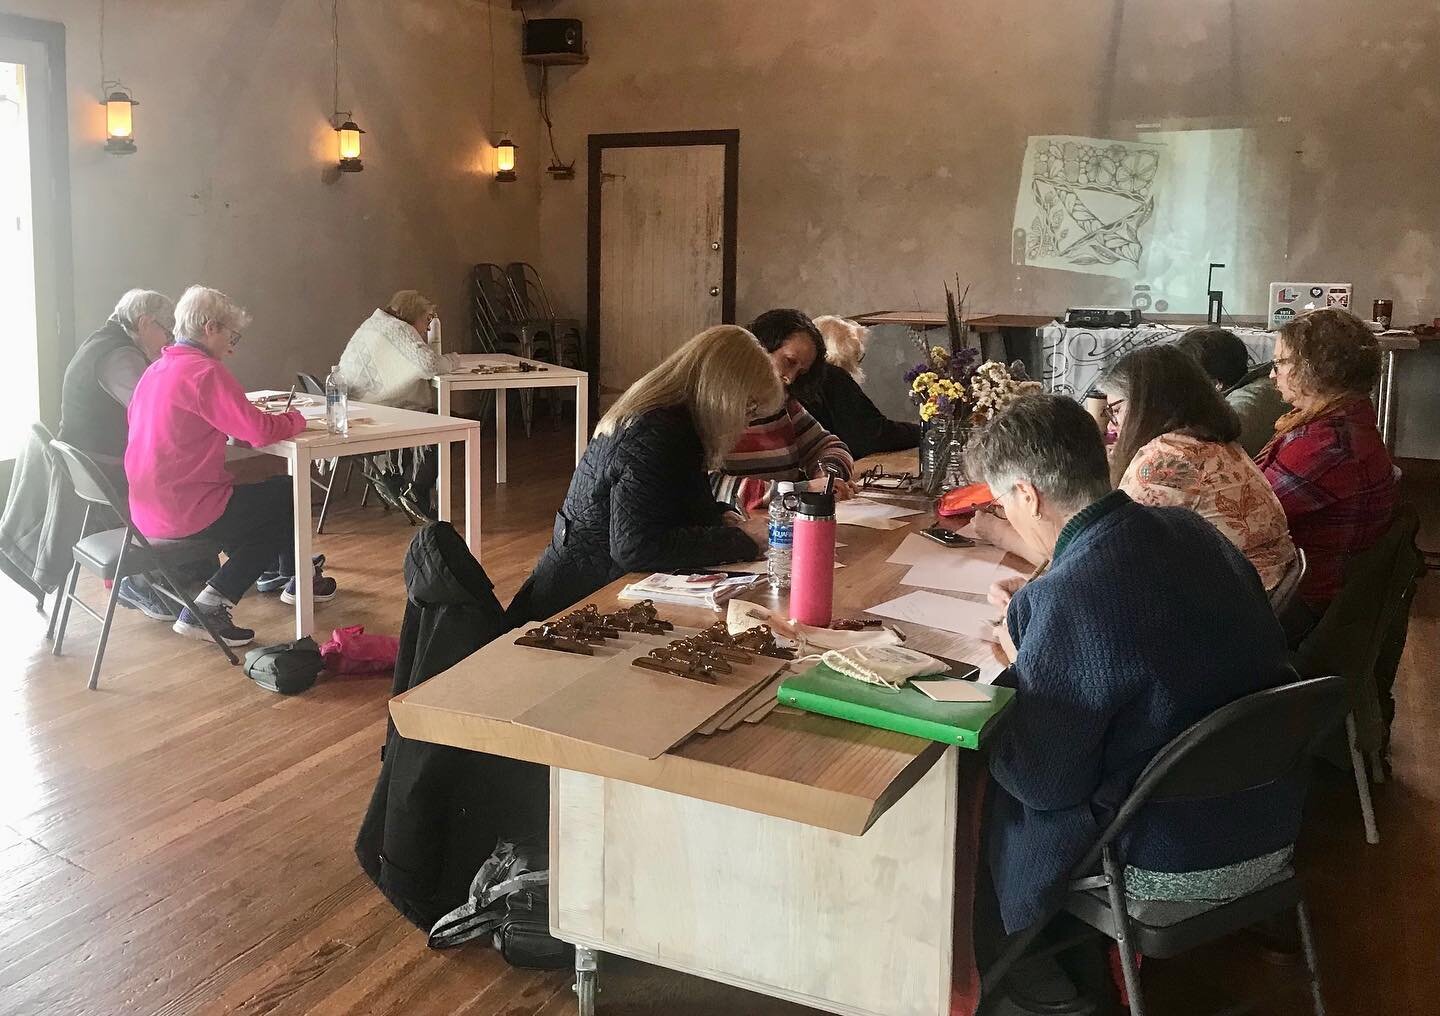 We hosted a wonderful art workshop at our venue that&rsquo;s cozy and zen. Sara taught them to Tangle with calmness and angles and everyone felt peaceful then.